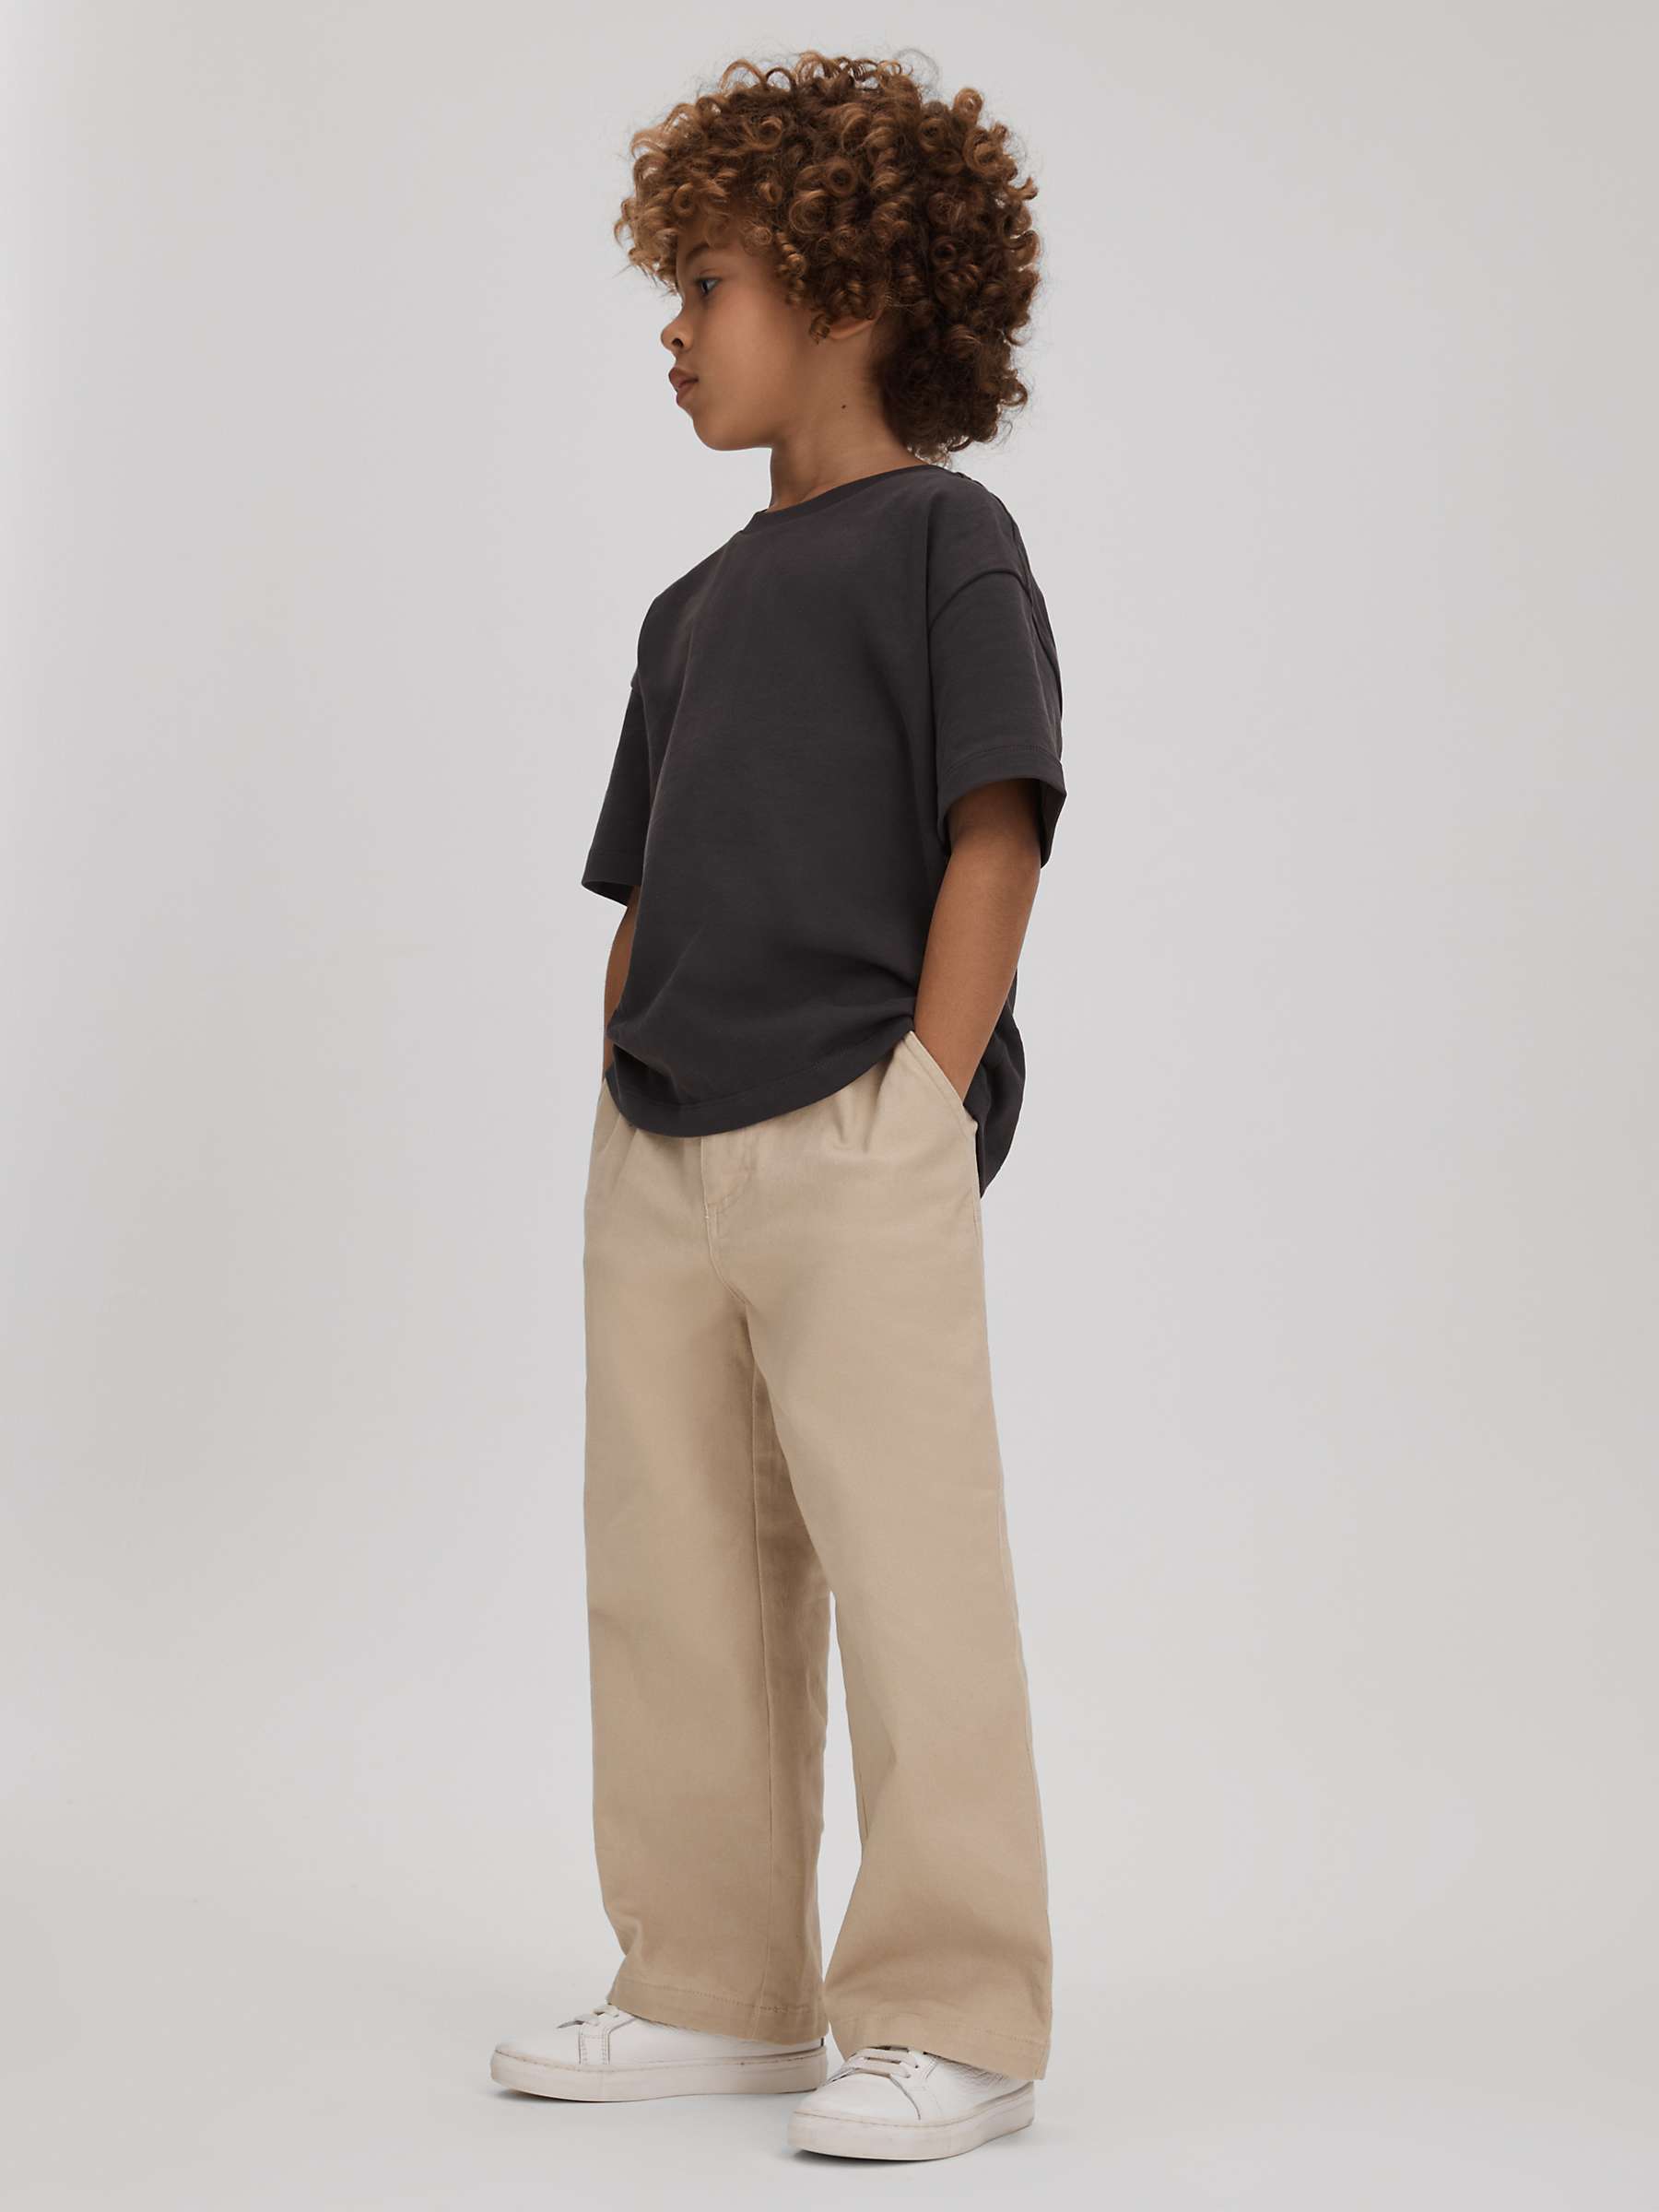 Buy Reiss Kids' Colter Loose Fit Trousers Online at johnlewis.com